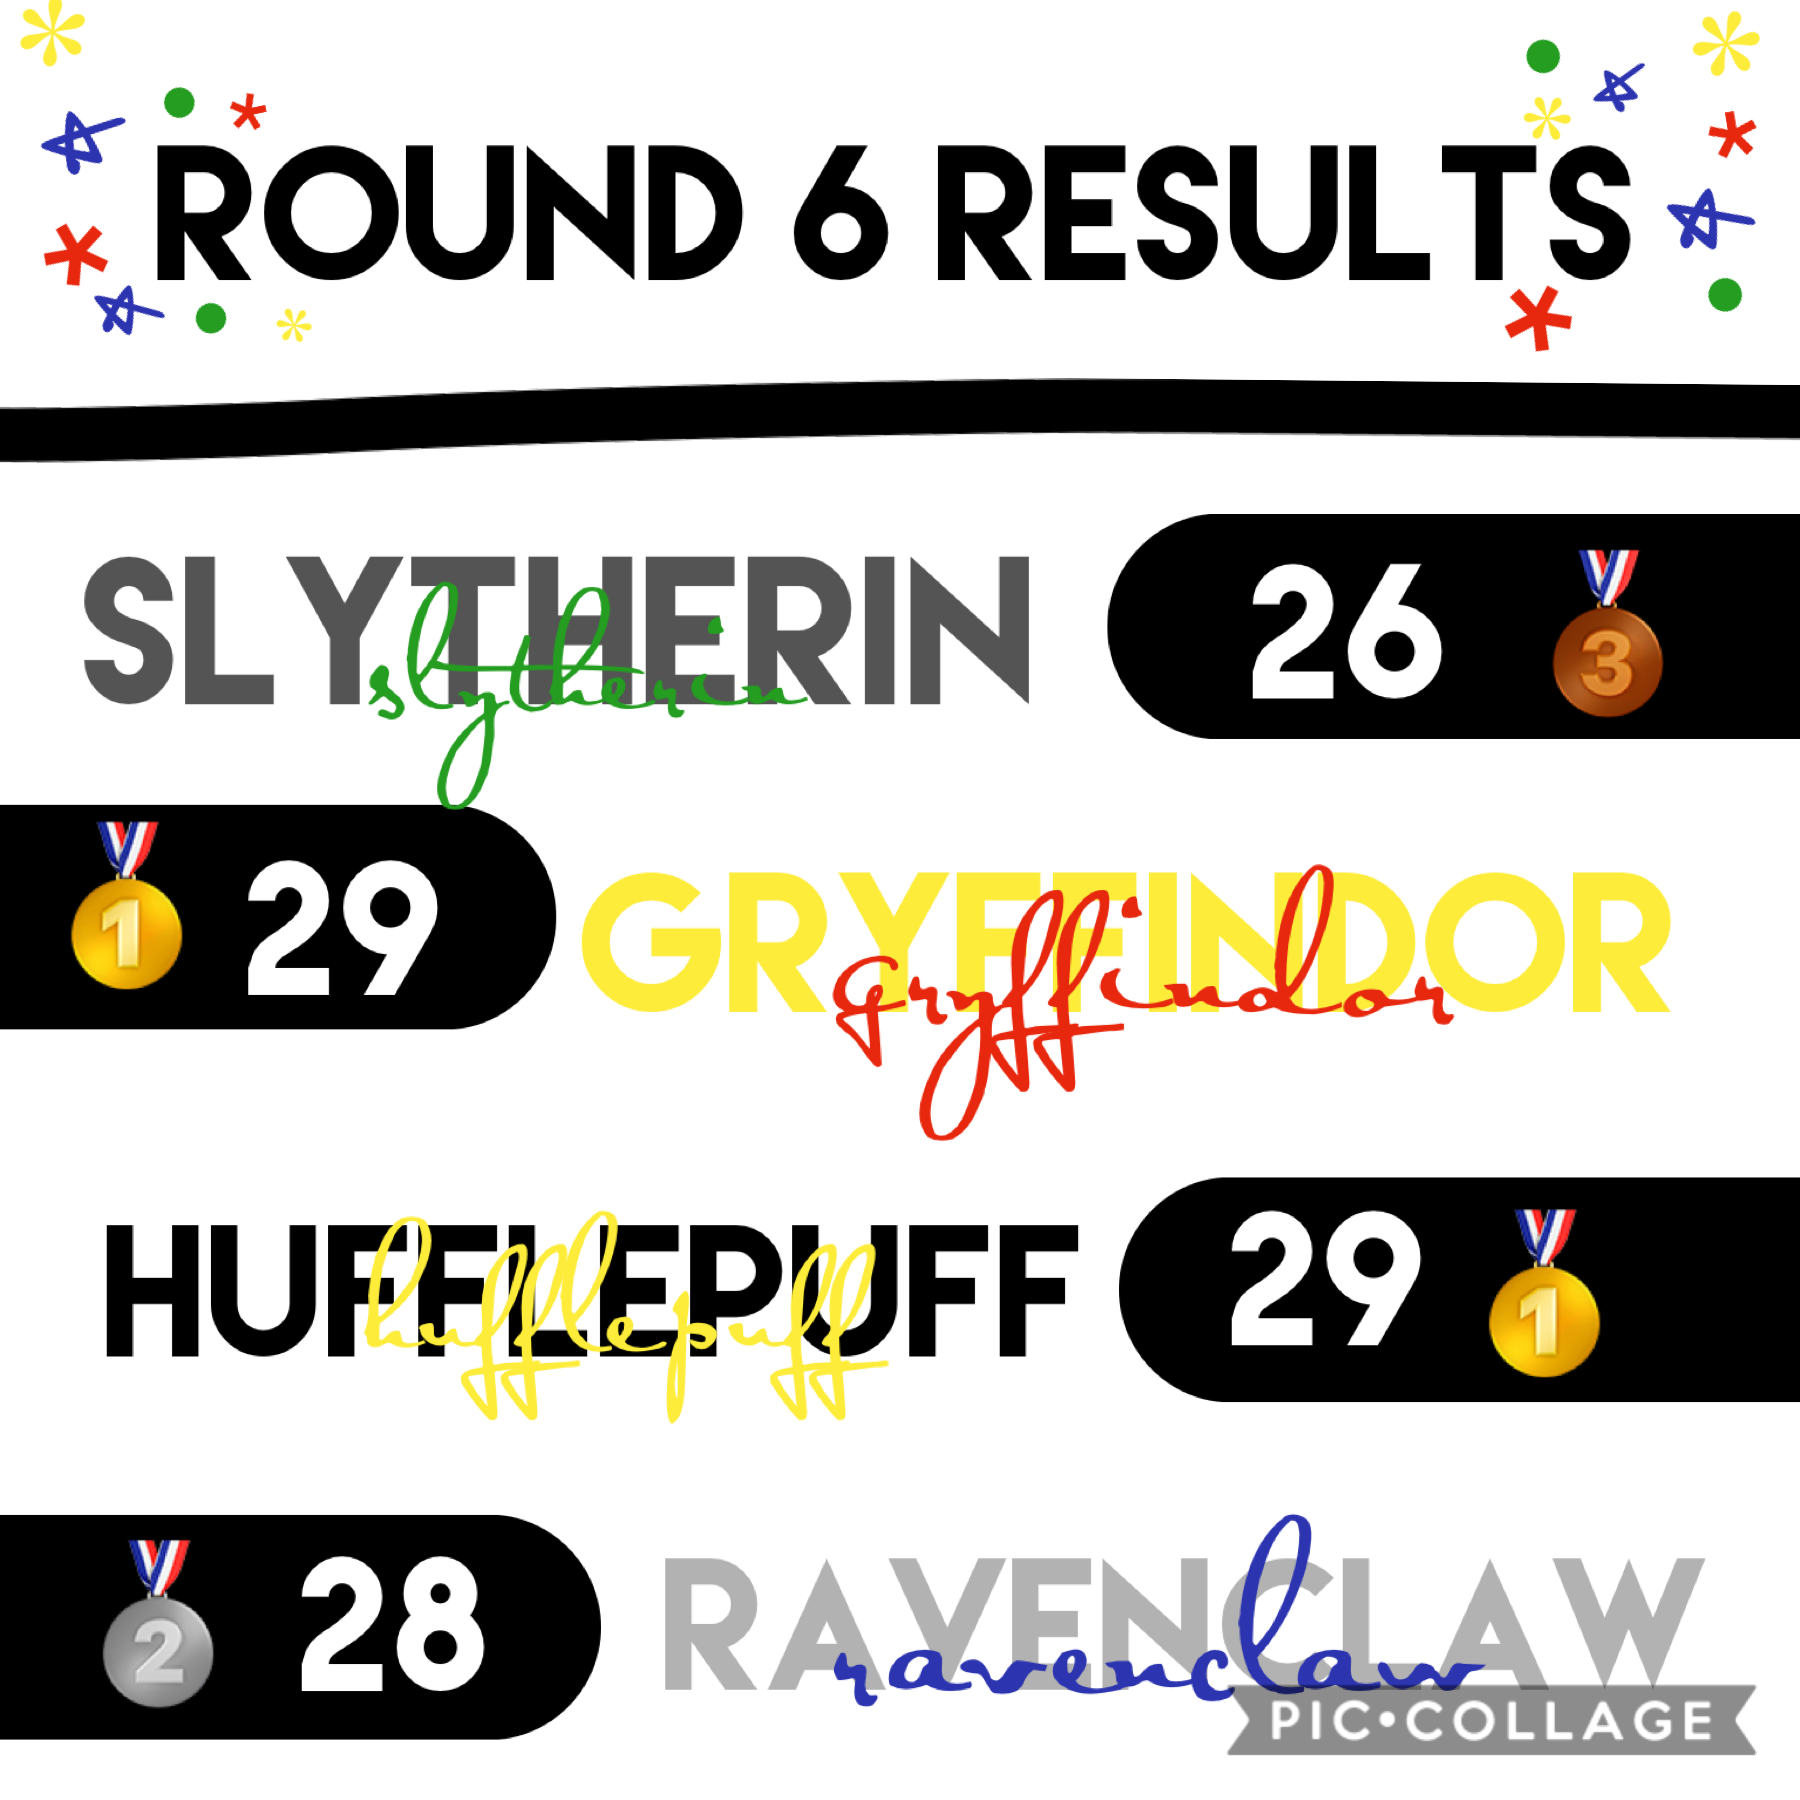 TAP!
gryffindor +hufflepuff = 1st
ravenclaw= 2nd
slytherin= 3rd

😏how do you like the new style?😏
i think it’s nice and fresh!
i still need a slytherin to start the games again!